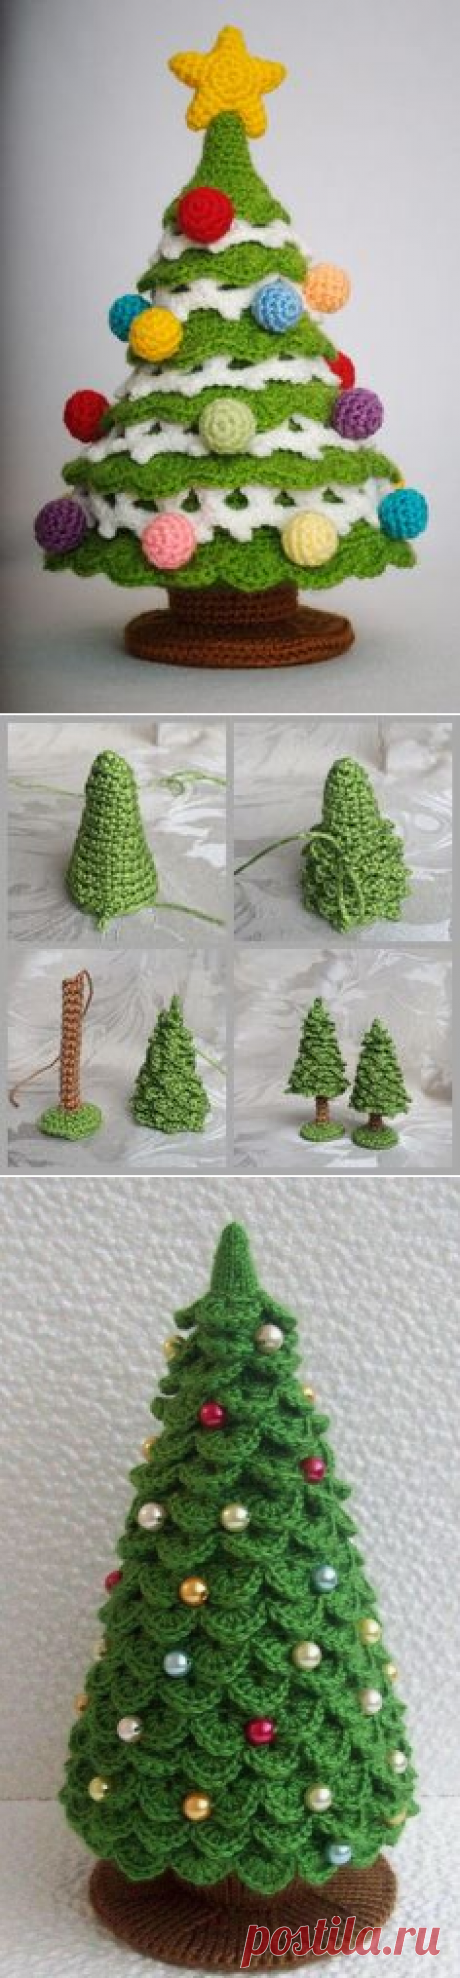 (23) Crocheted christmas tree | Crochet and Things